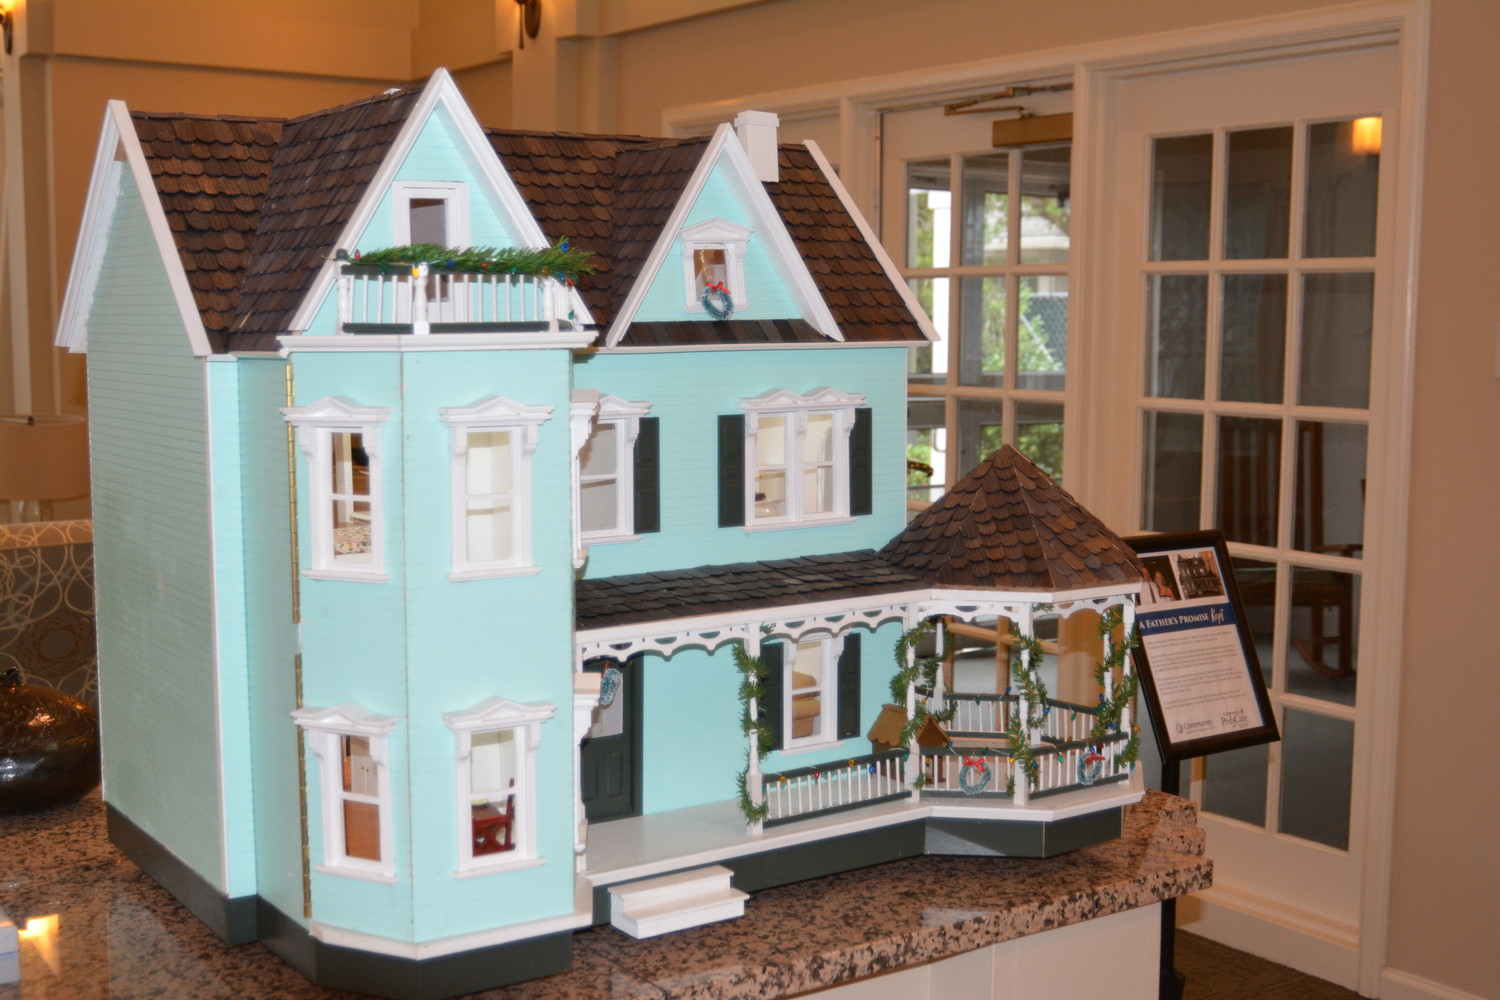 One of Hoffman's doll houses is displayed alongside his story in the lobby of Community Hospice & Palliative Care's Earl B. Hadlow Center for Caring in Jacksonville.